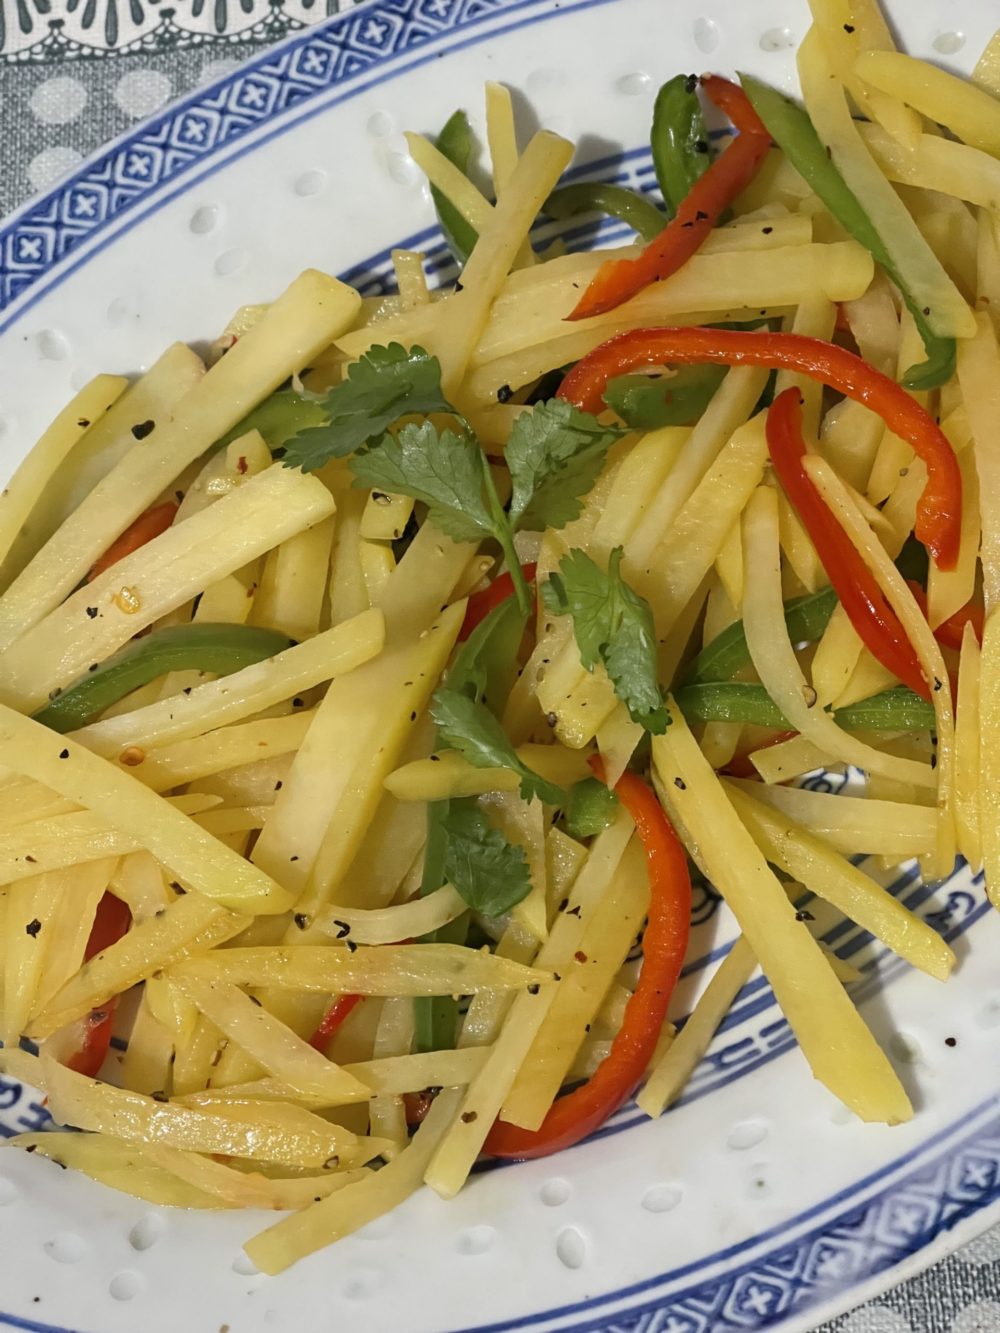 shredded potatoes and bell peppers on a plate